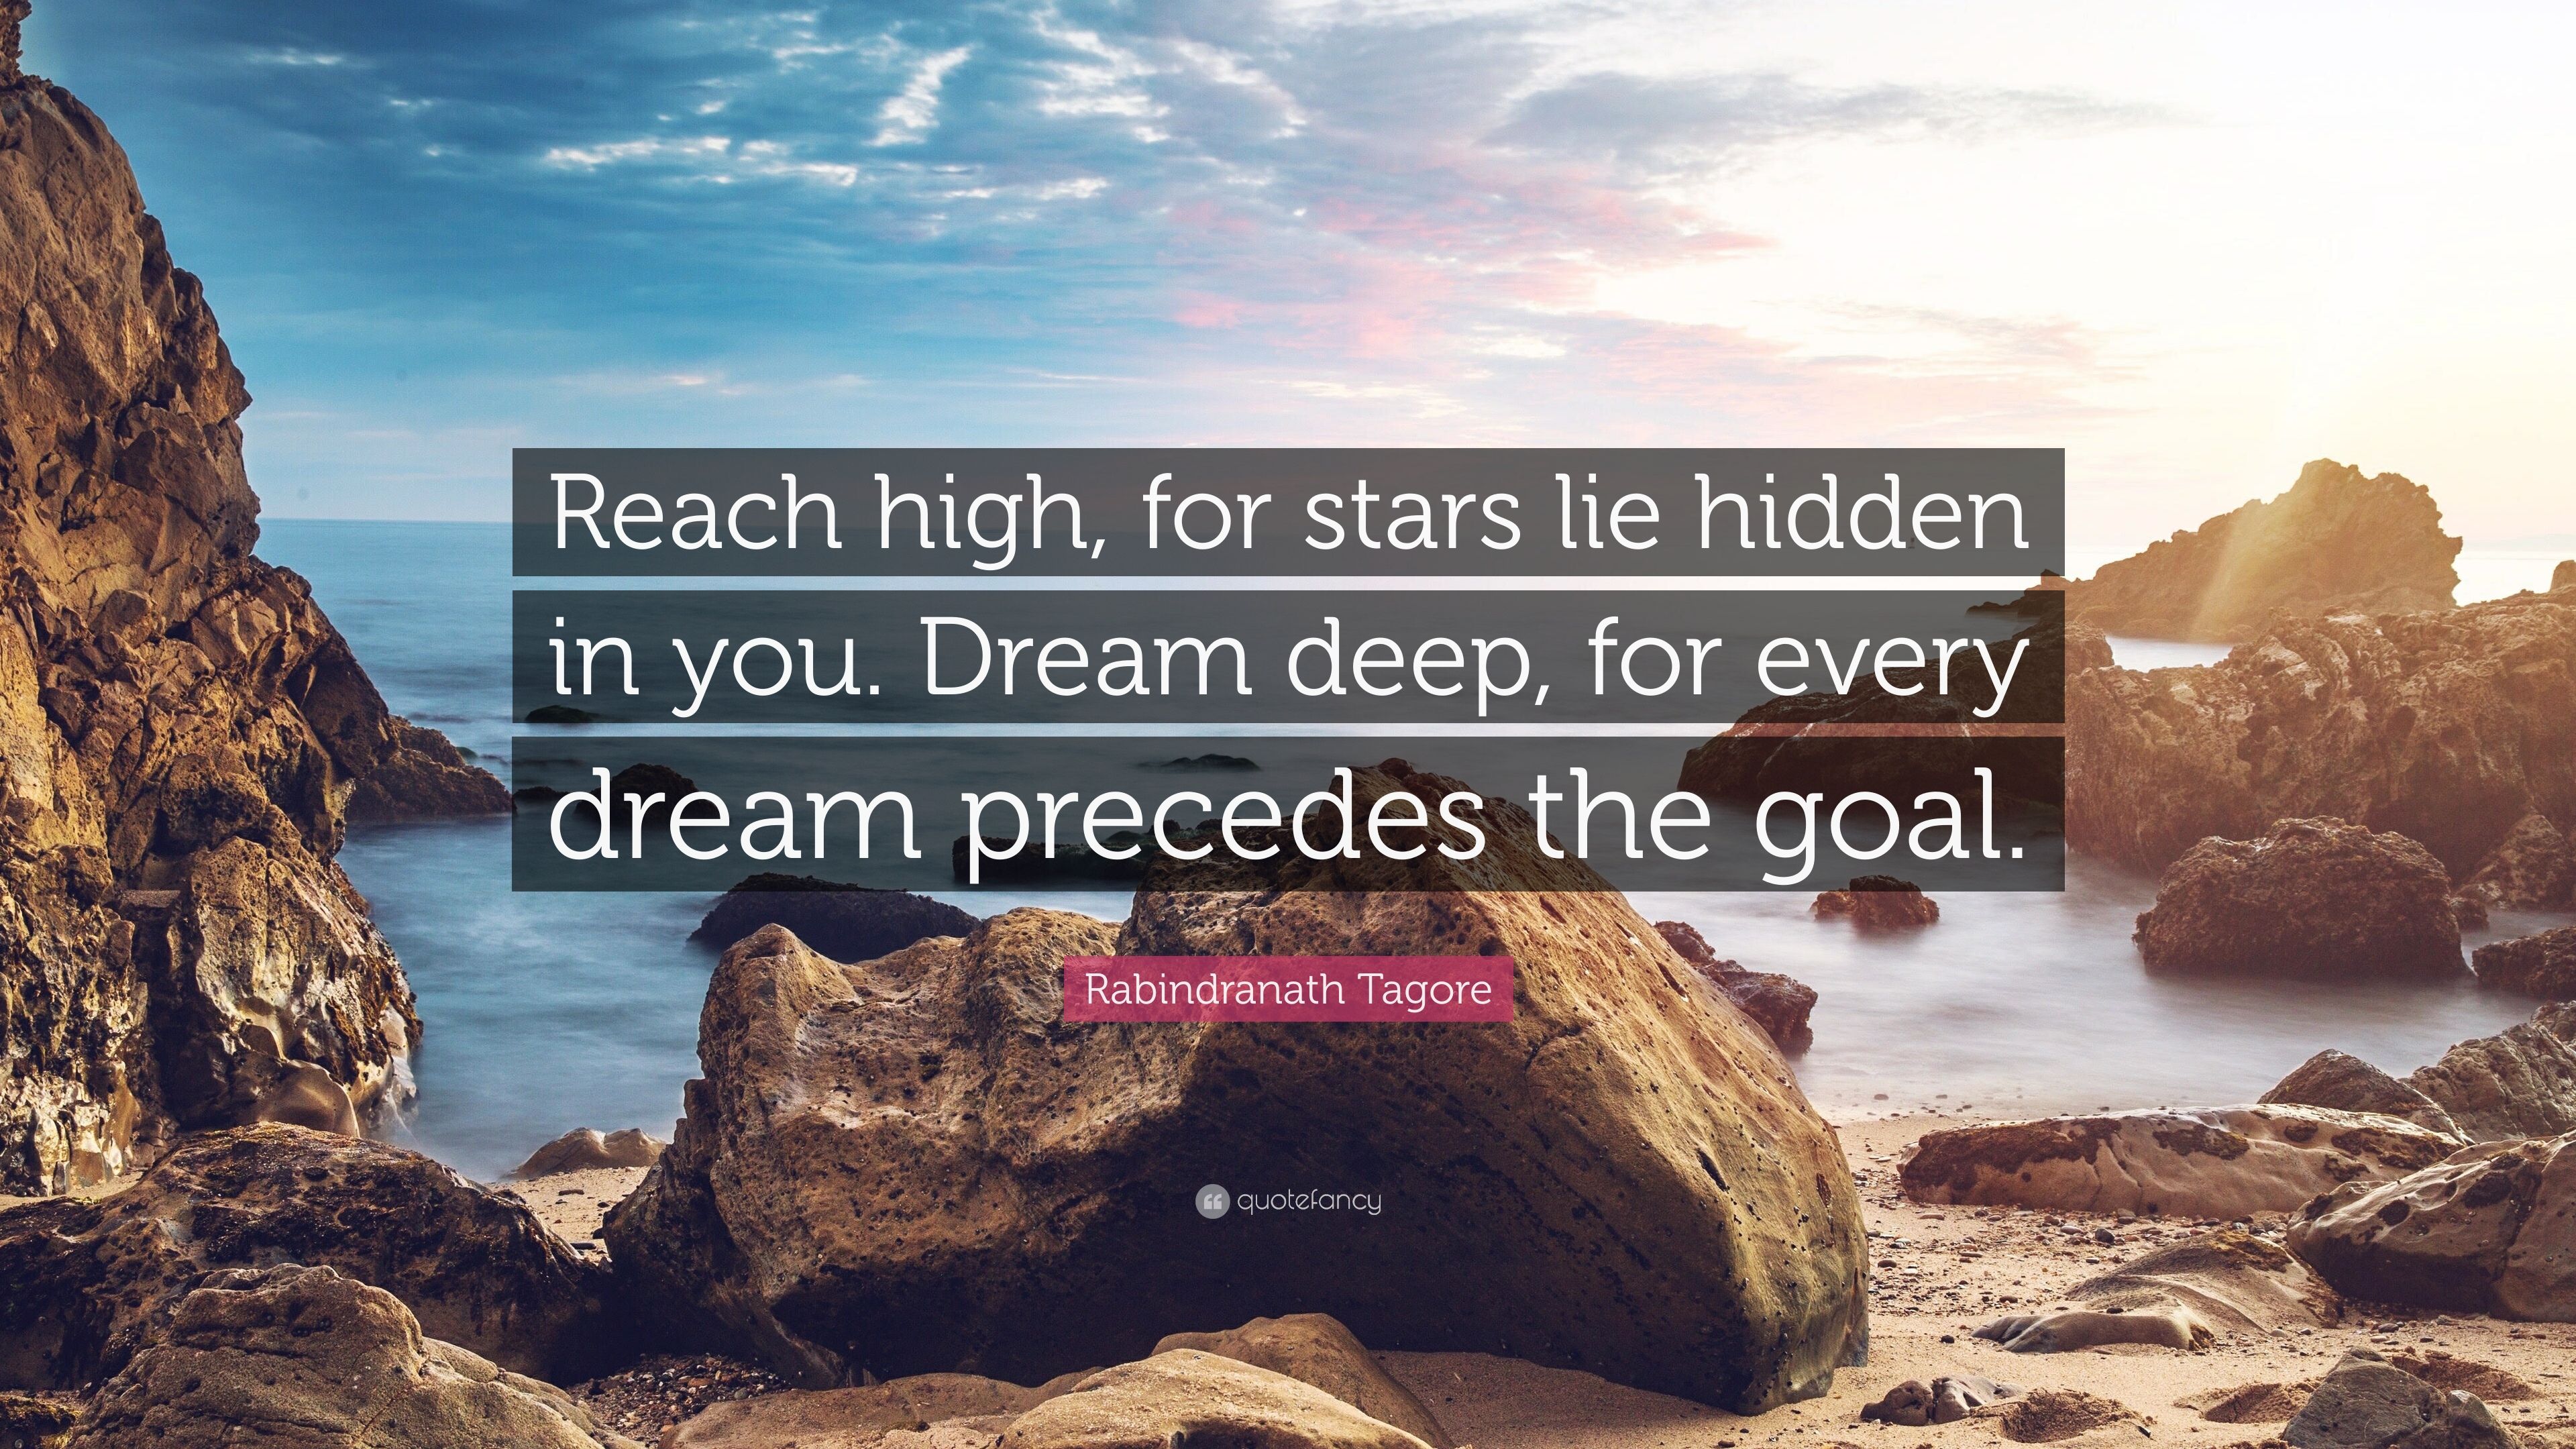 Quotes About Stars wallpaper Quotefancy. Wallpaper 4k